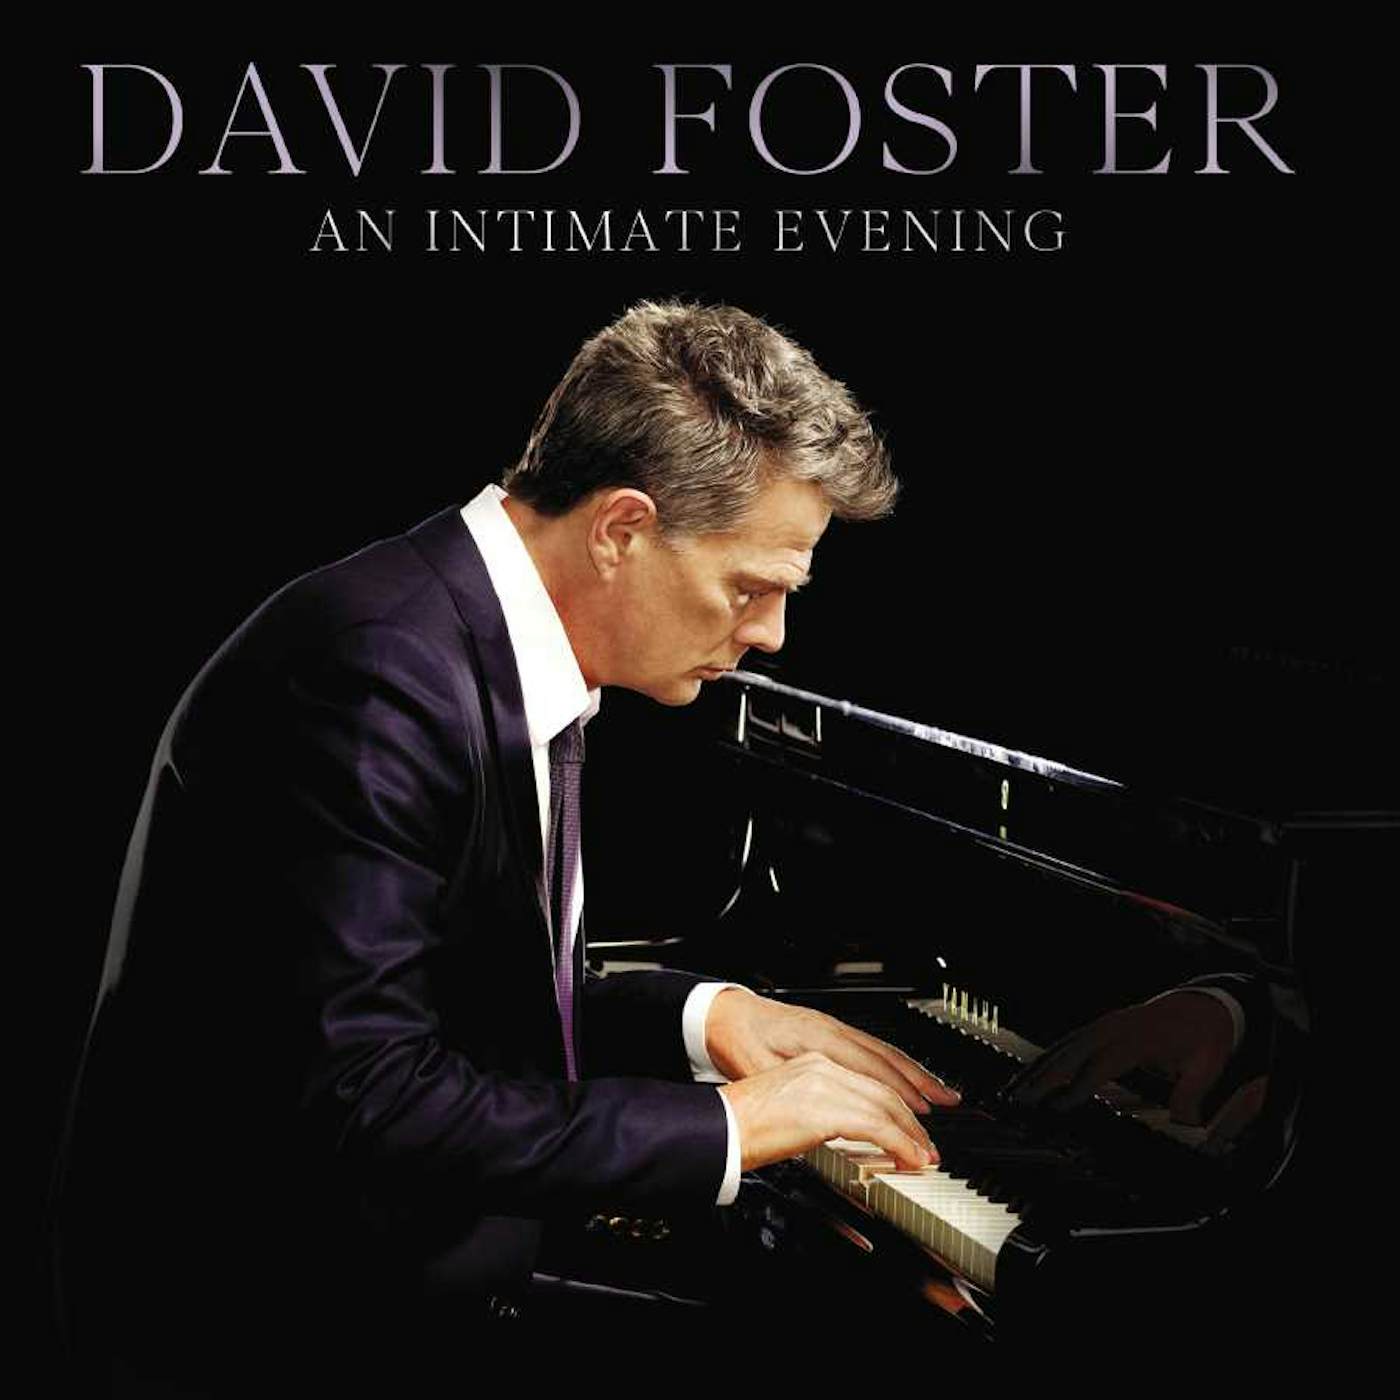 David Foster AN INTIMATE EVENING (LIVE AT THE ORPHEUM THEATRE) CD